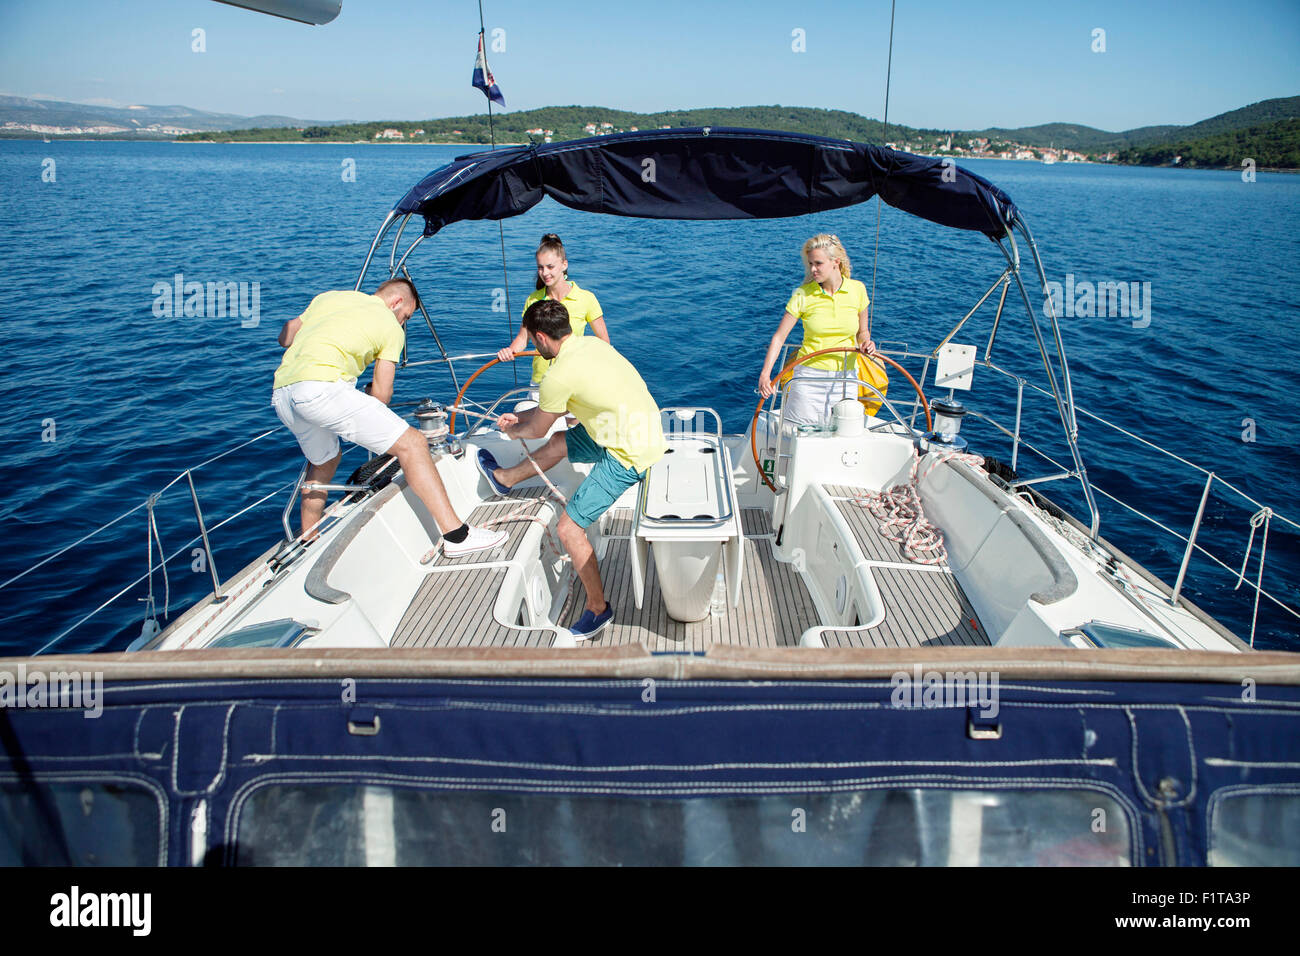 Group of friends together on sailboat, Adriatic Sea Stock Photo